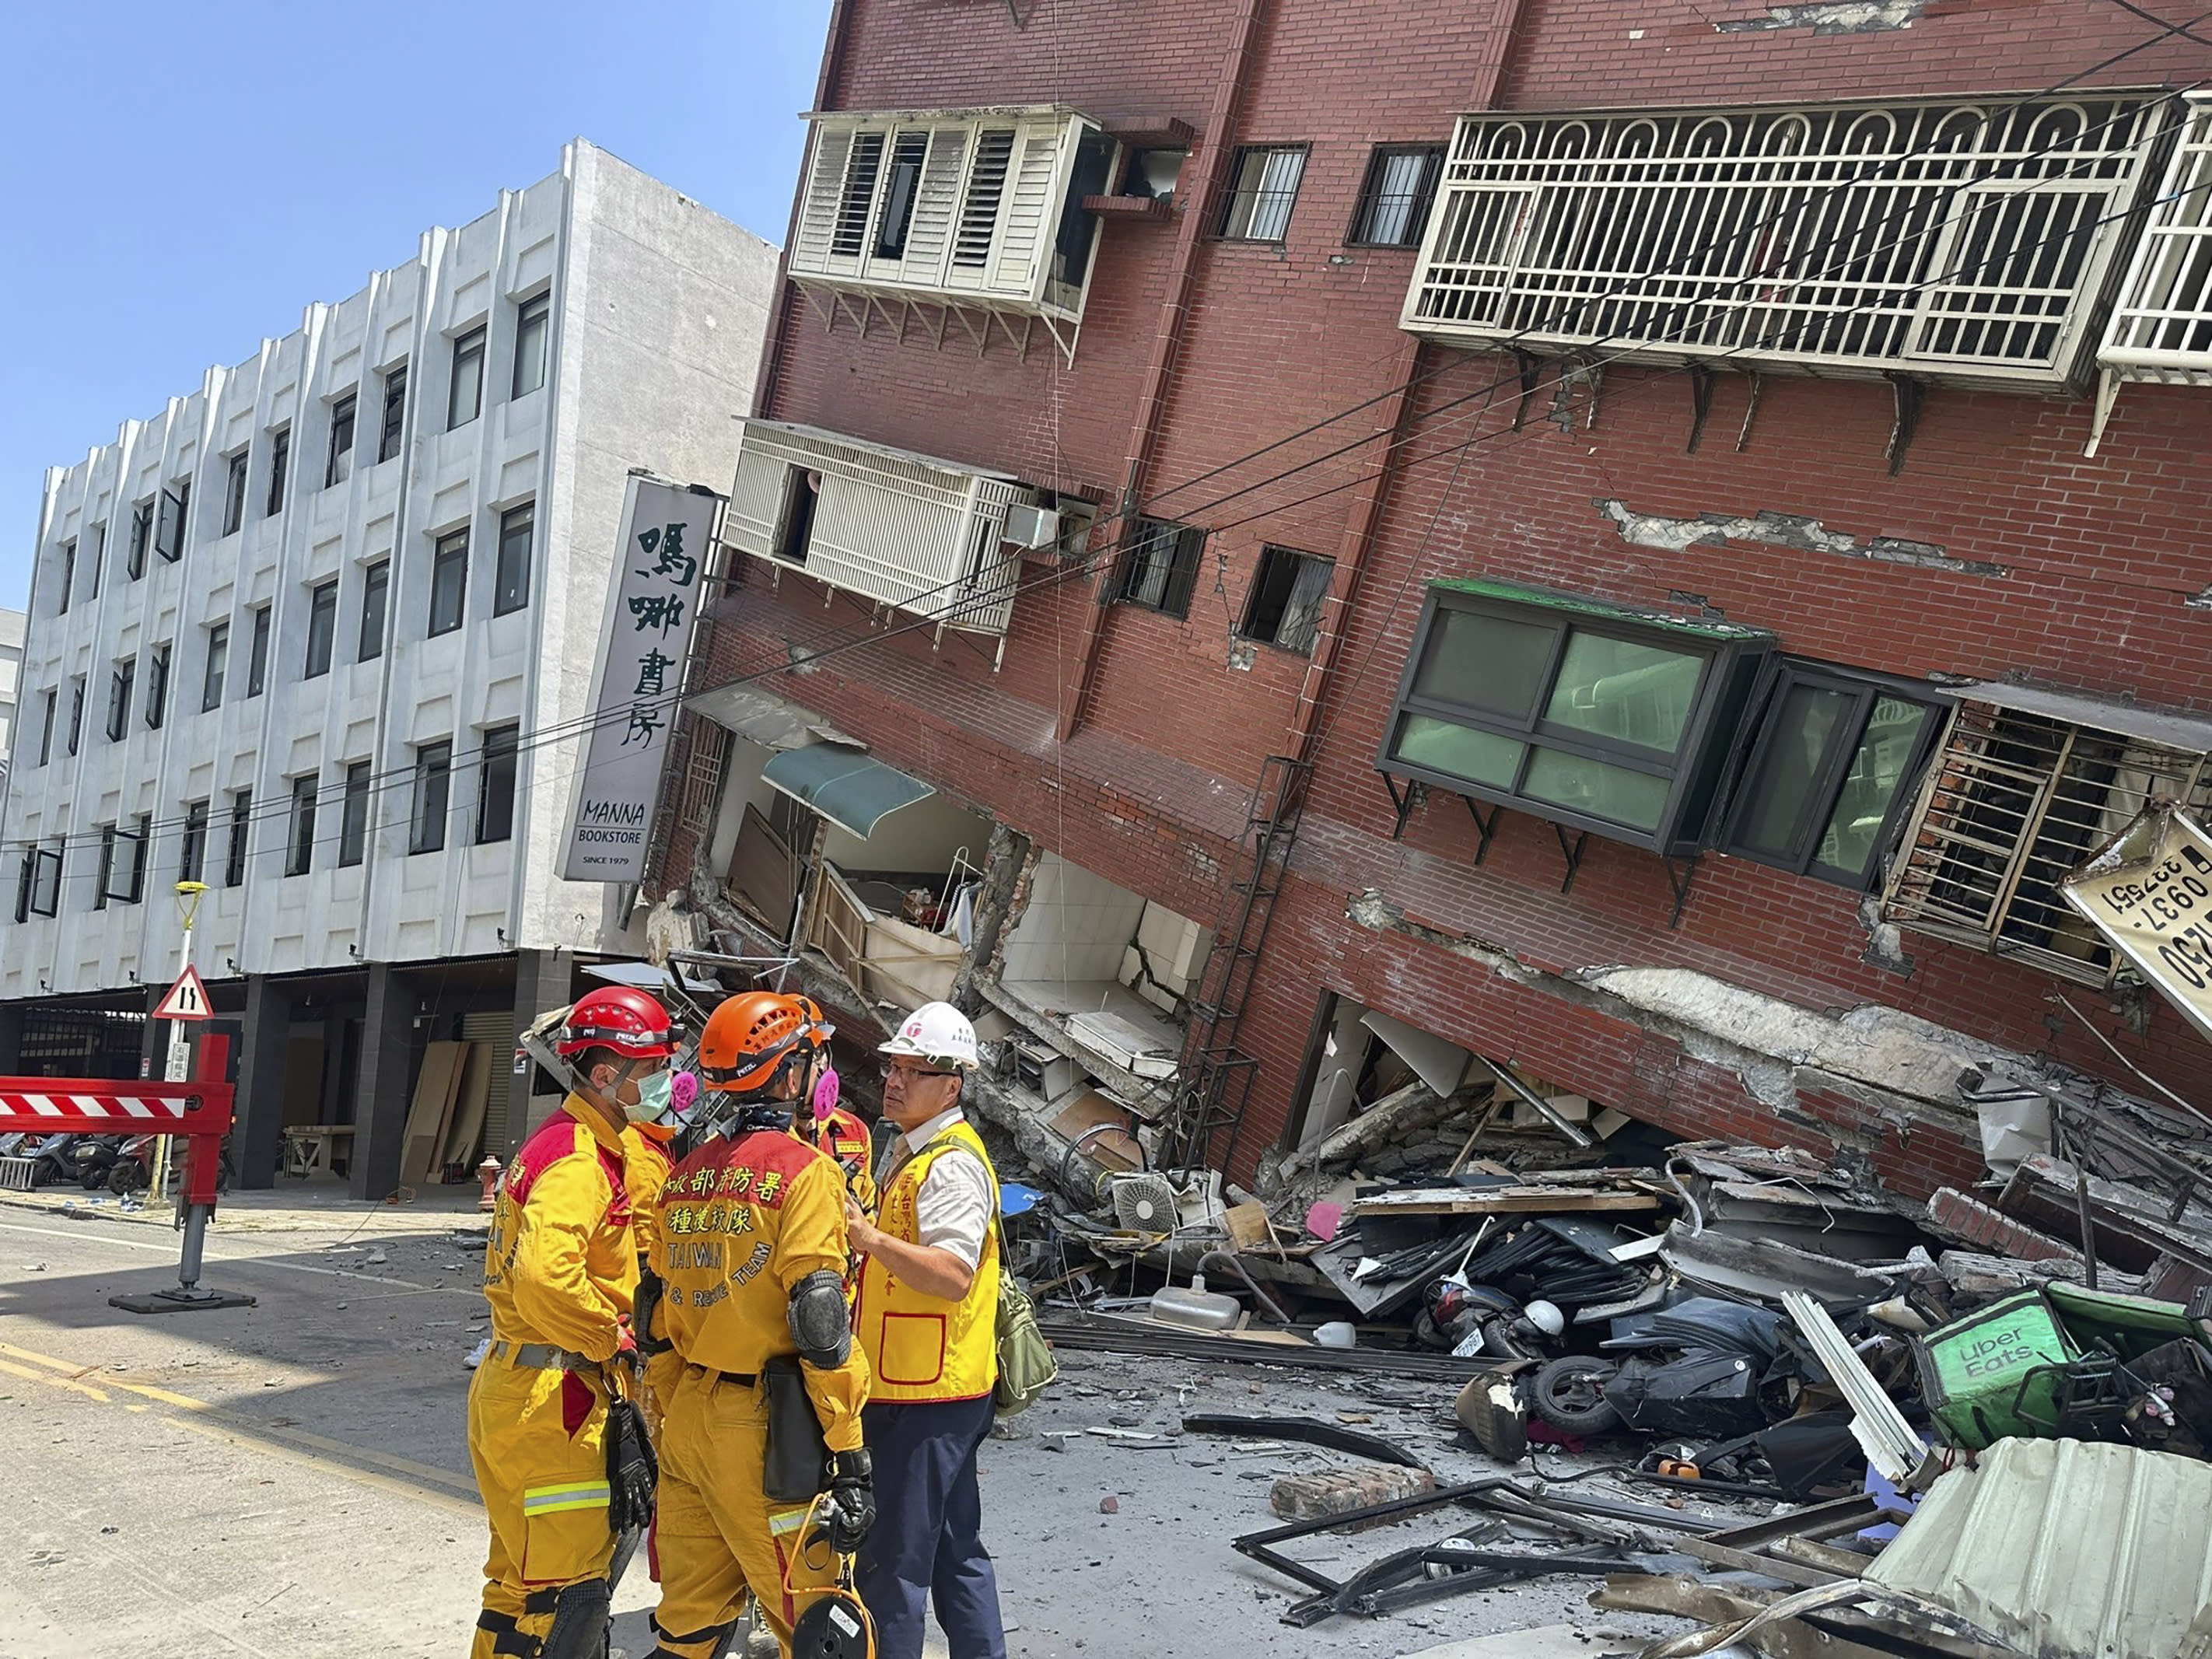 Members of a search and rescue team huddle outside of a leaning building in Hualien City.